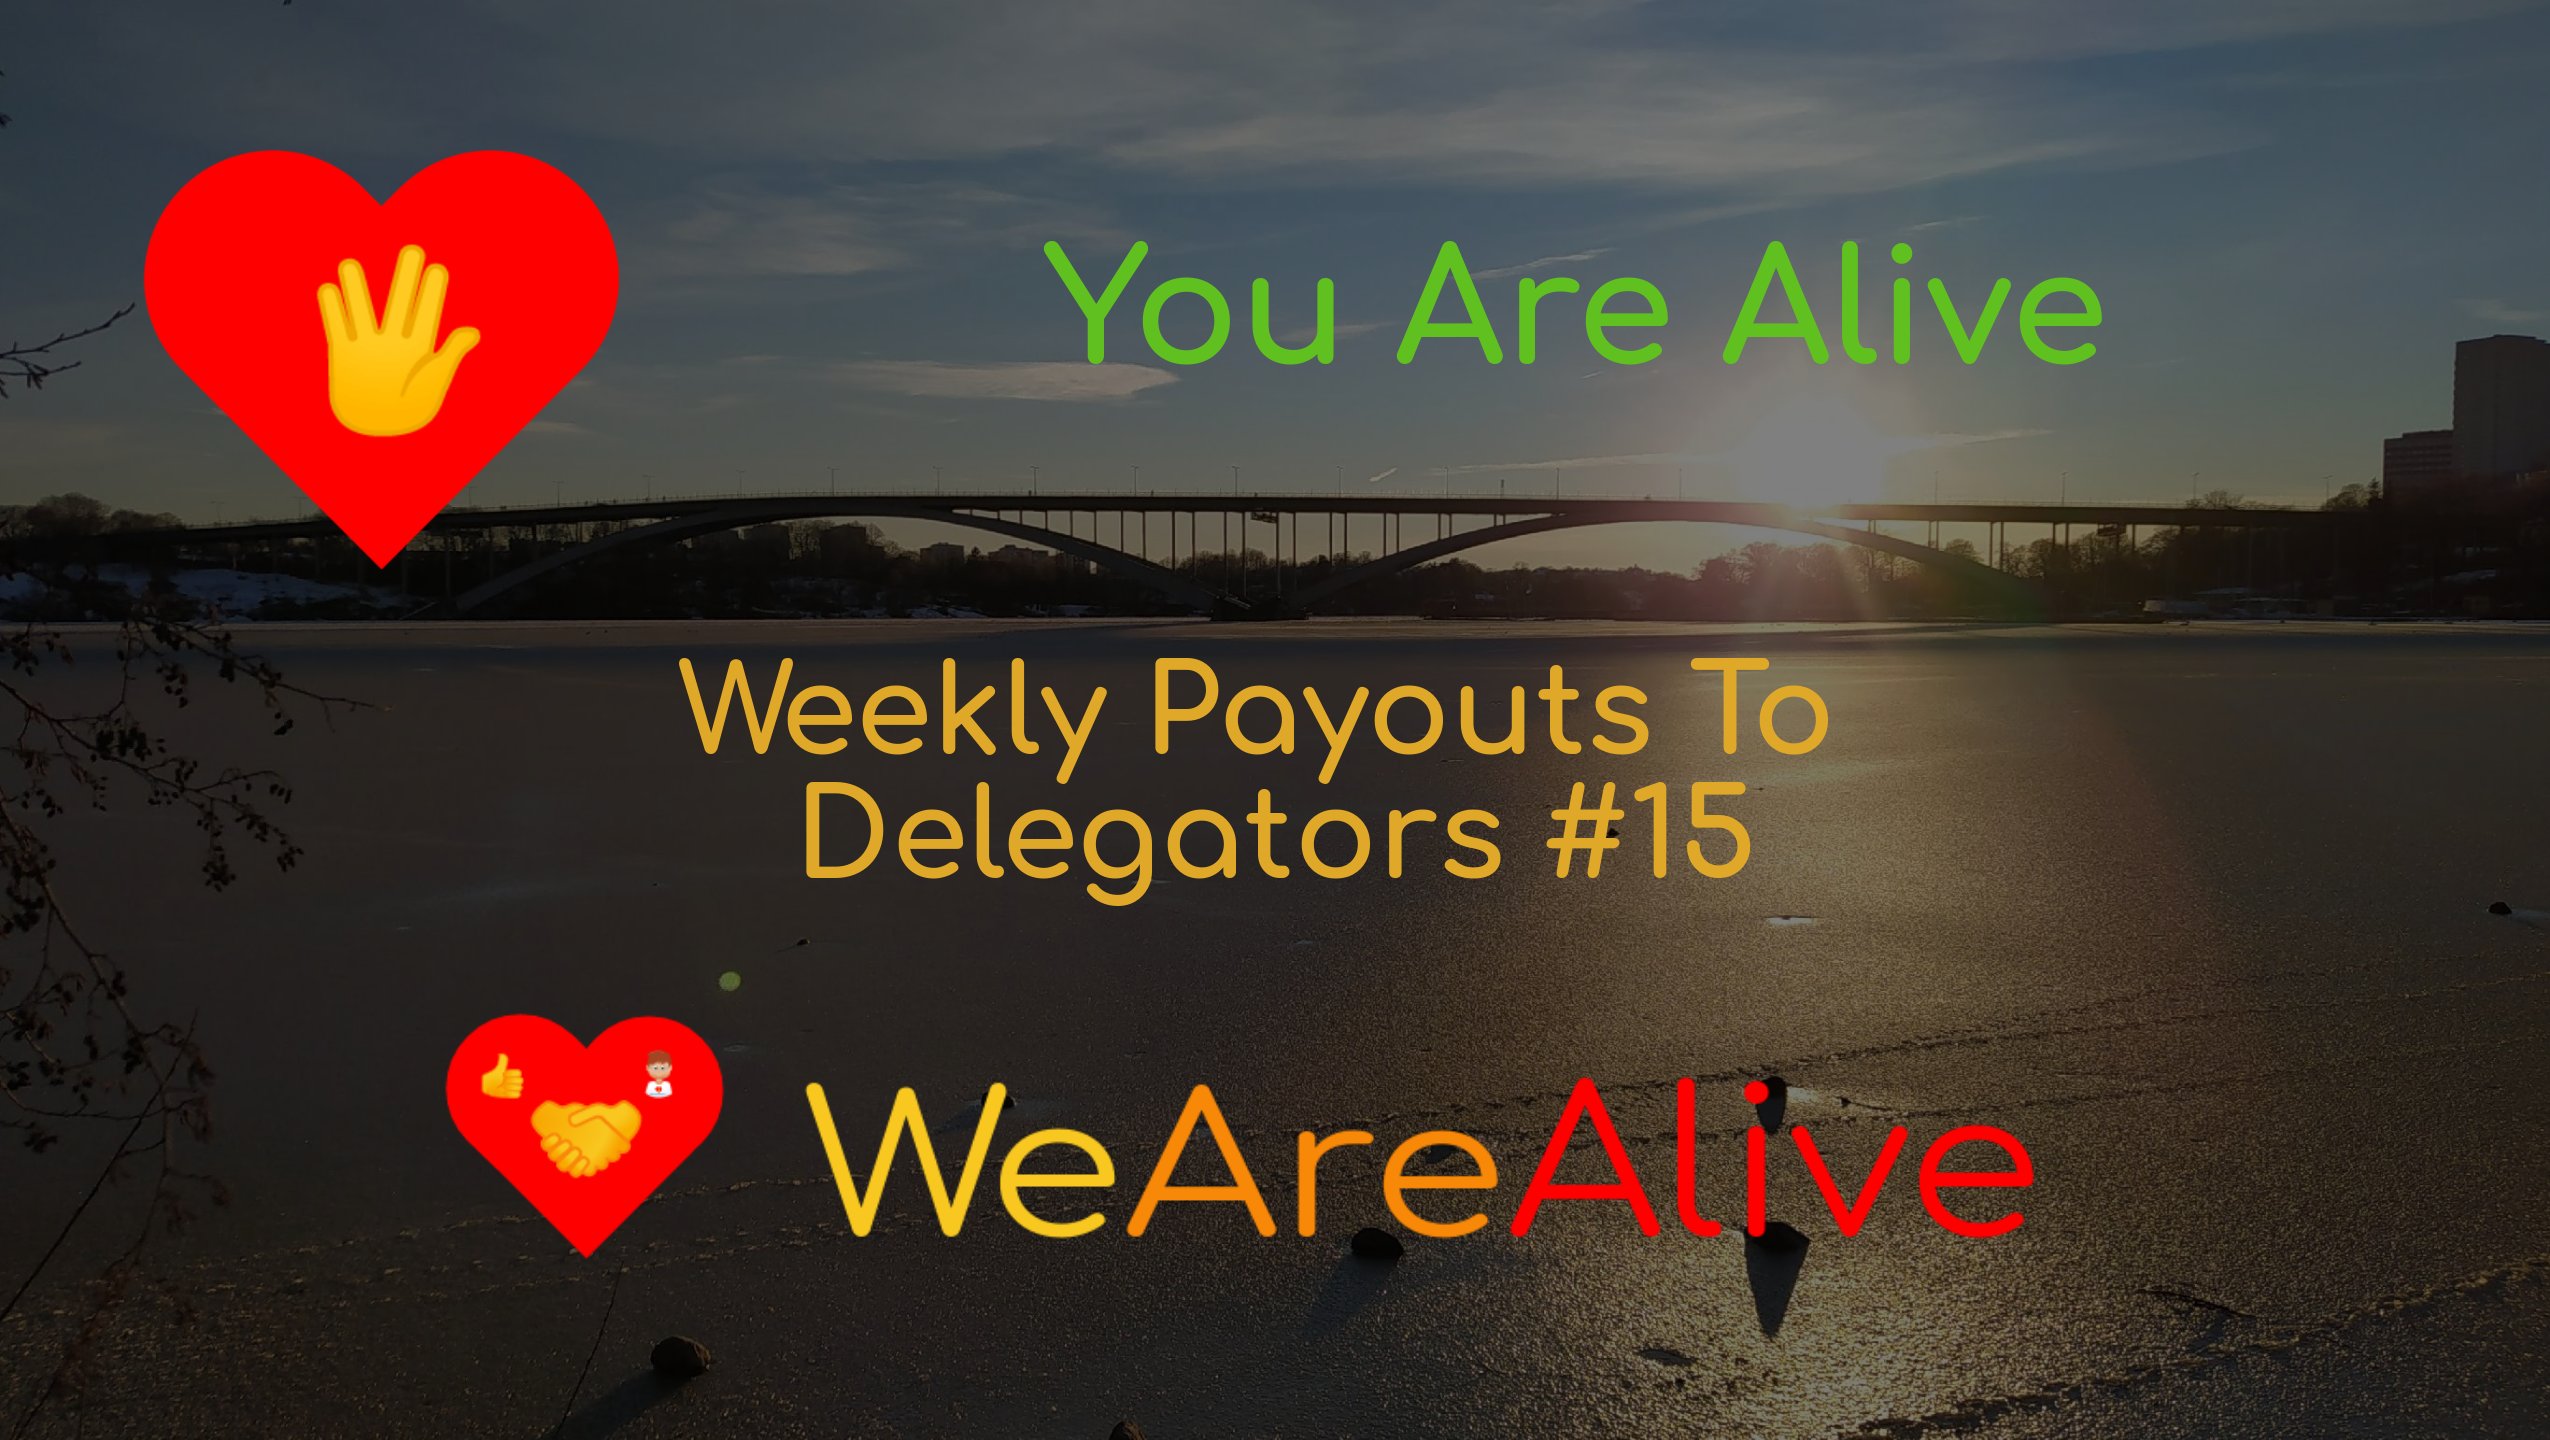 @youarealive/you-are-alive-weekly-payouts-to-delegators-15